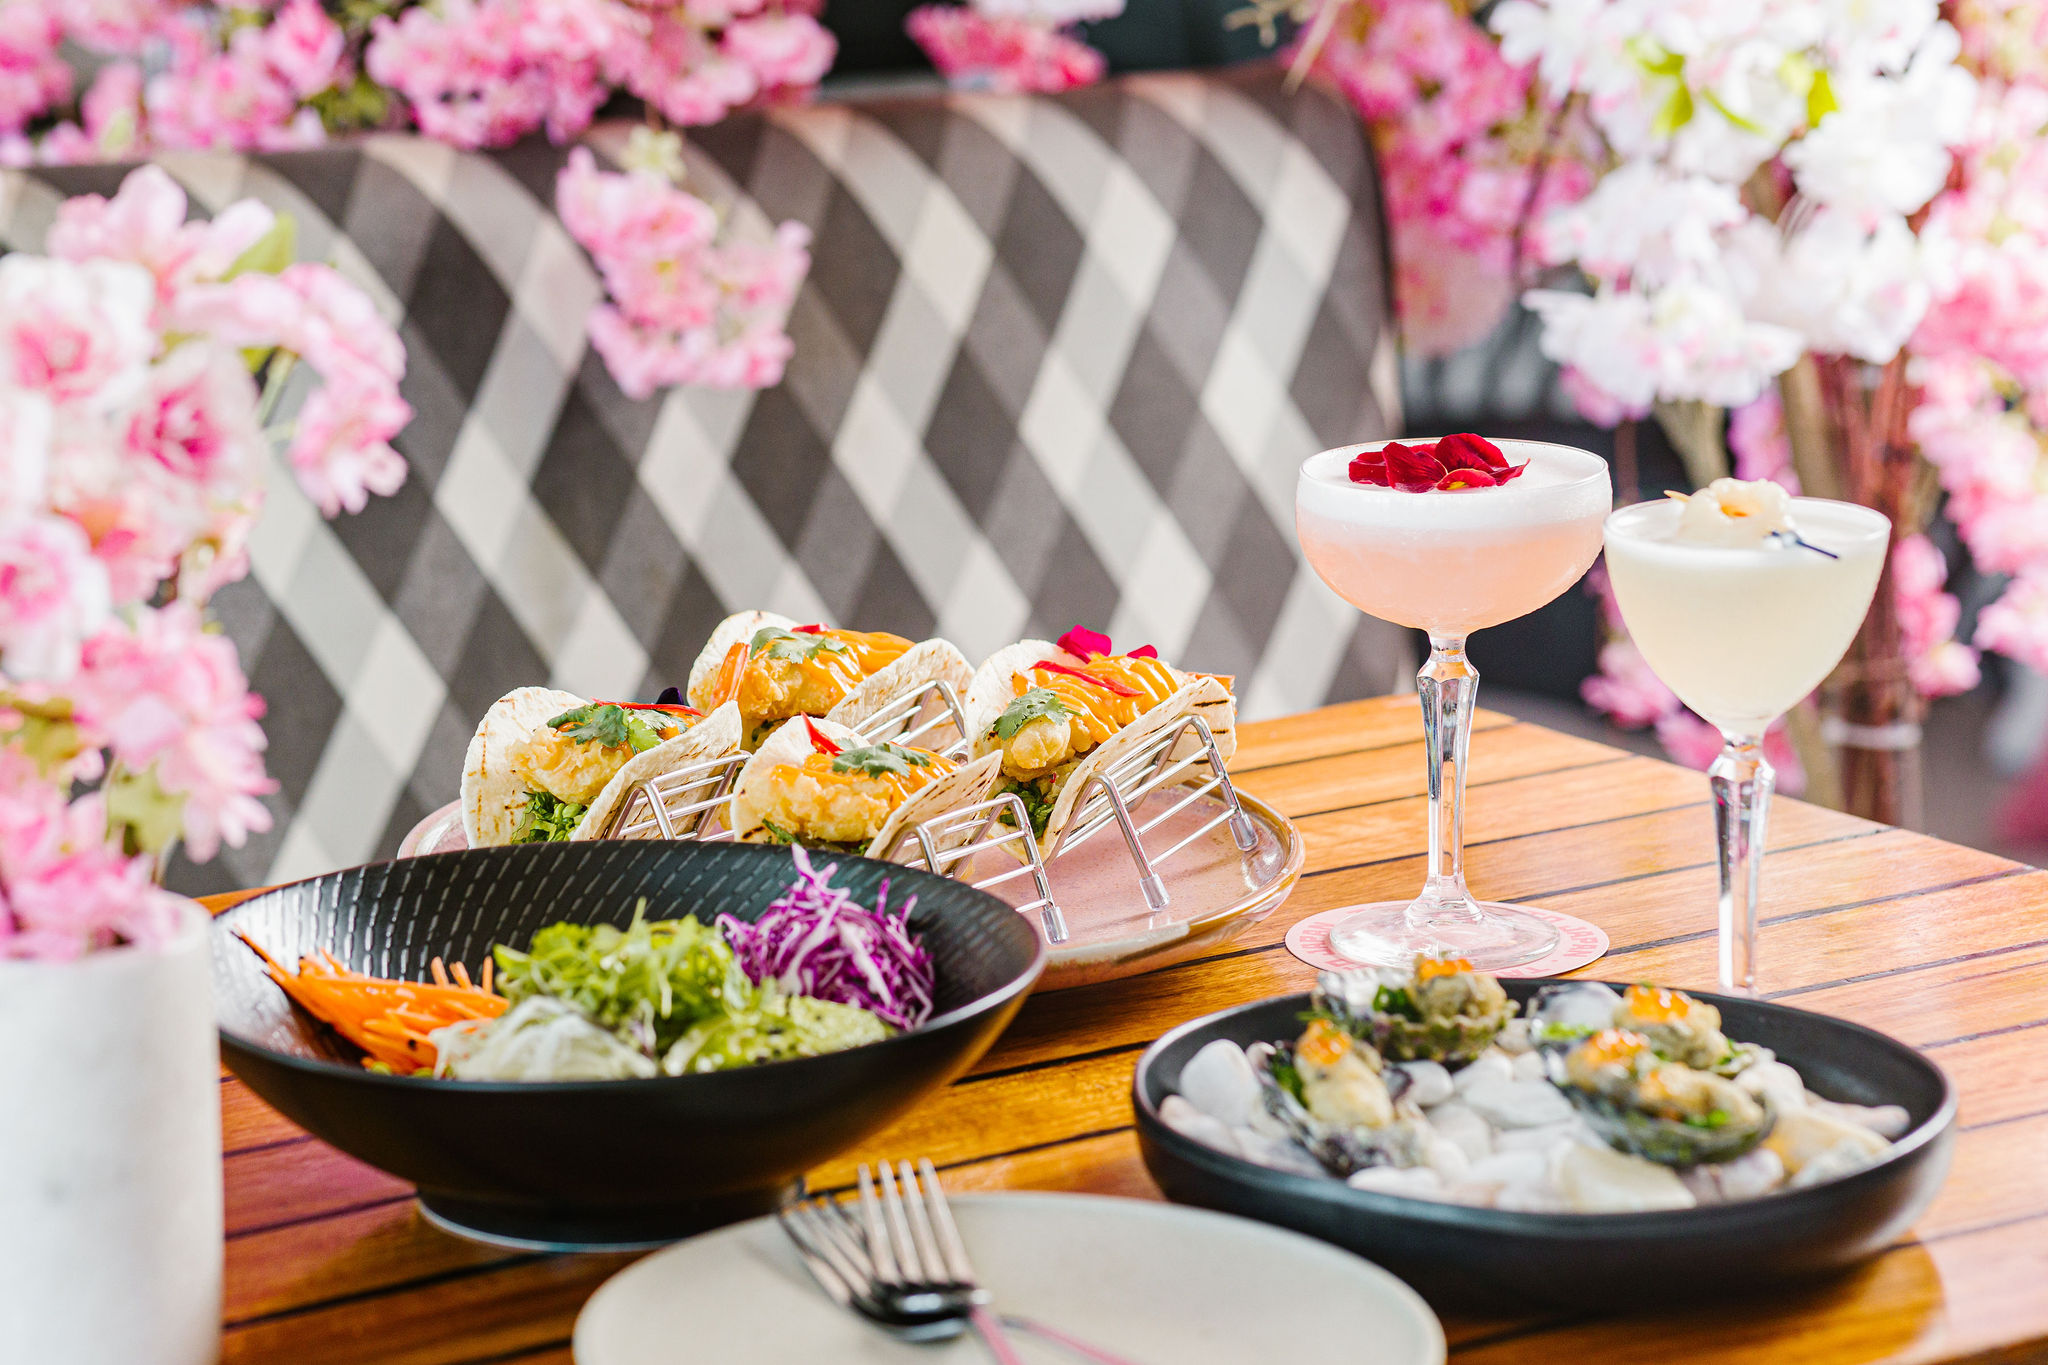 Australian Venue Co's Staycation to Japan launches in Smith St Social next week